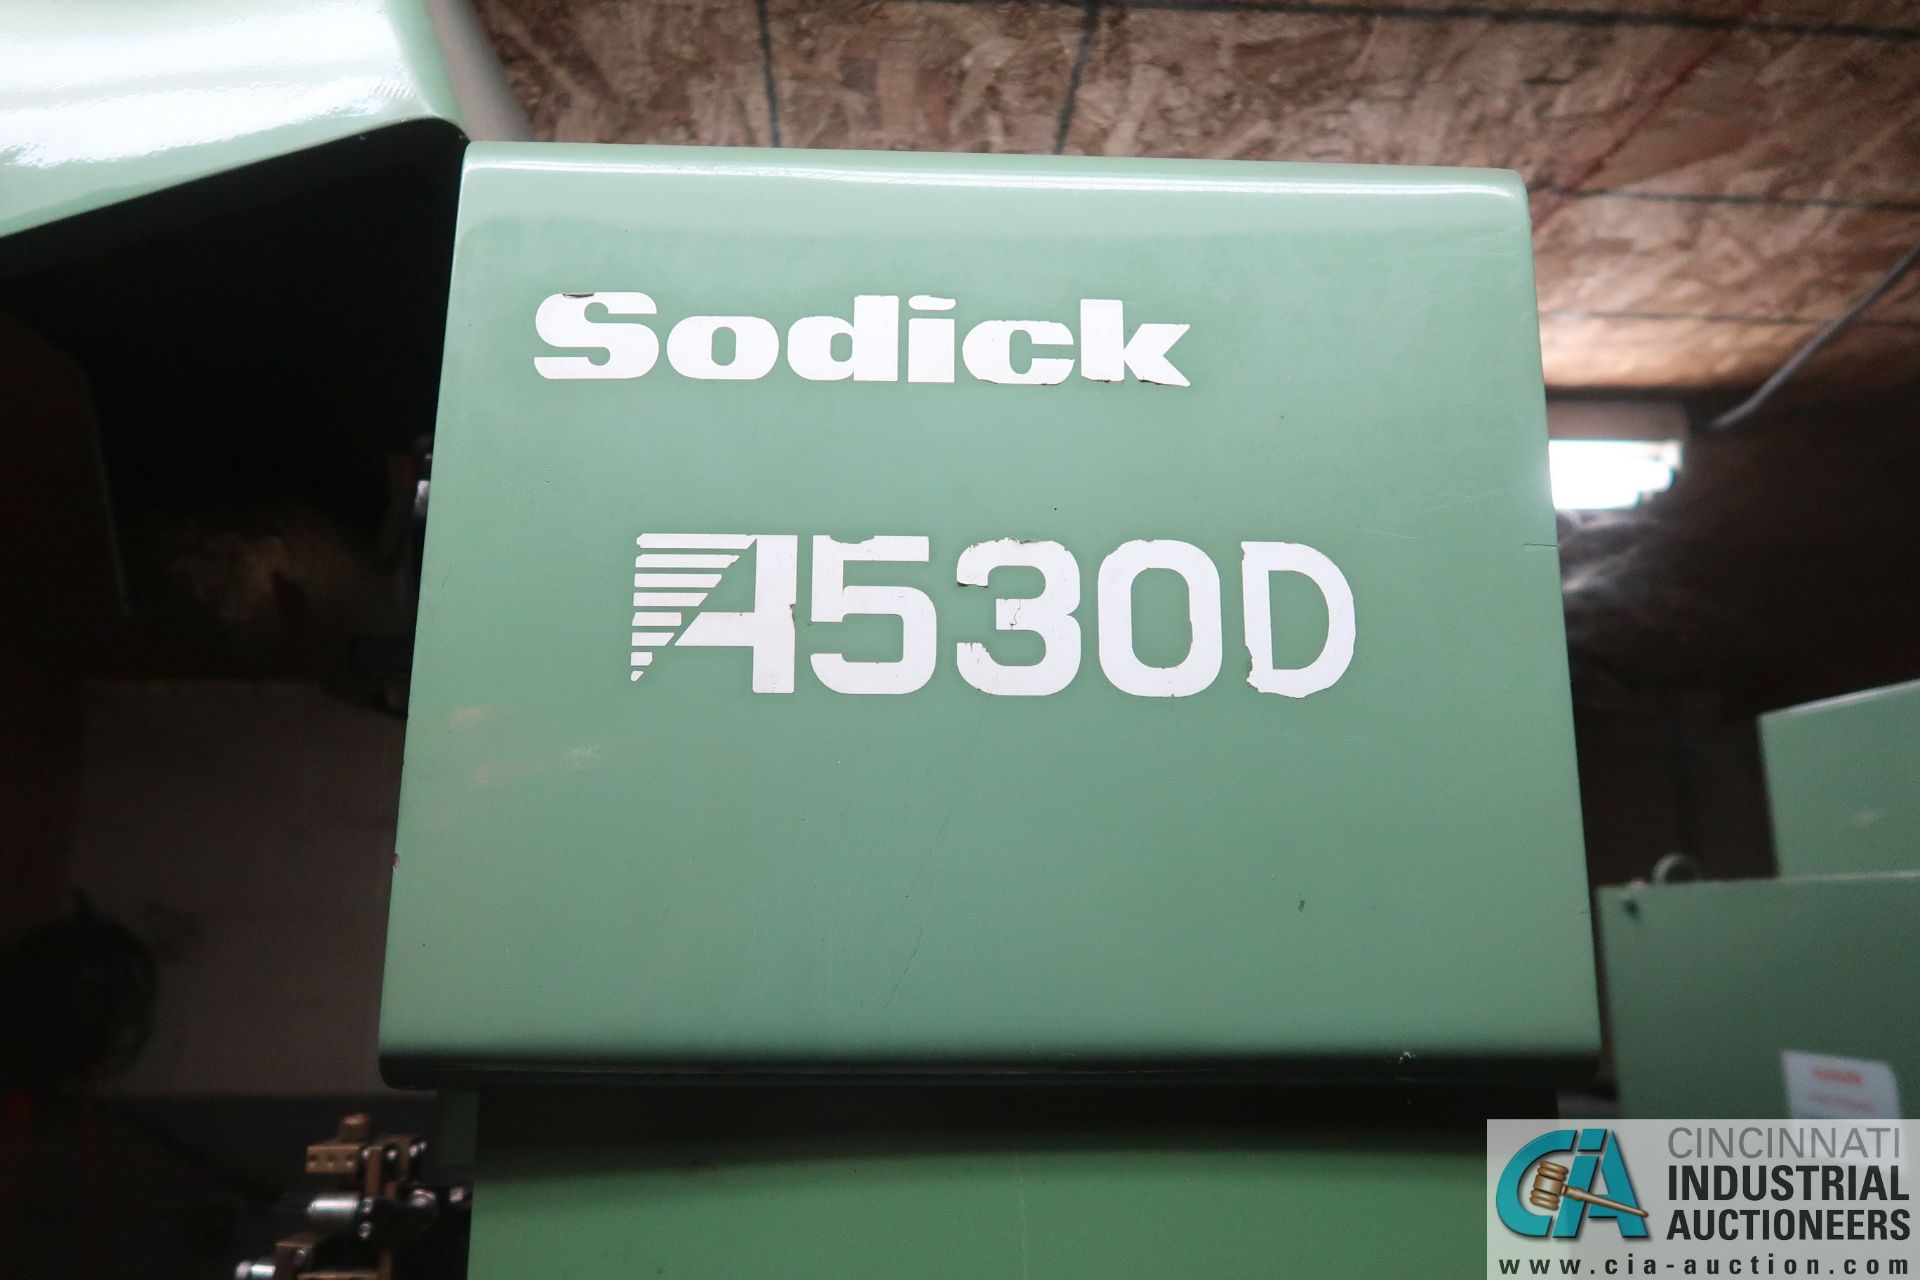 SODICK MODEL A530 WIRE EDM; S/N T-2165, 30" X 39" X 18" CHAMBER, EX21 CONTROLS - Image 6 of 20